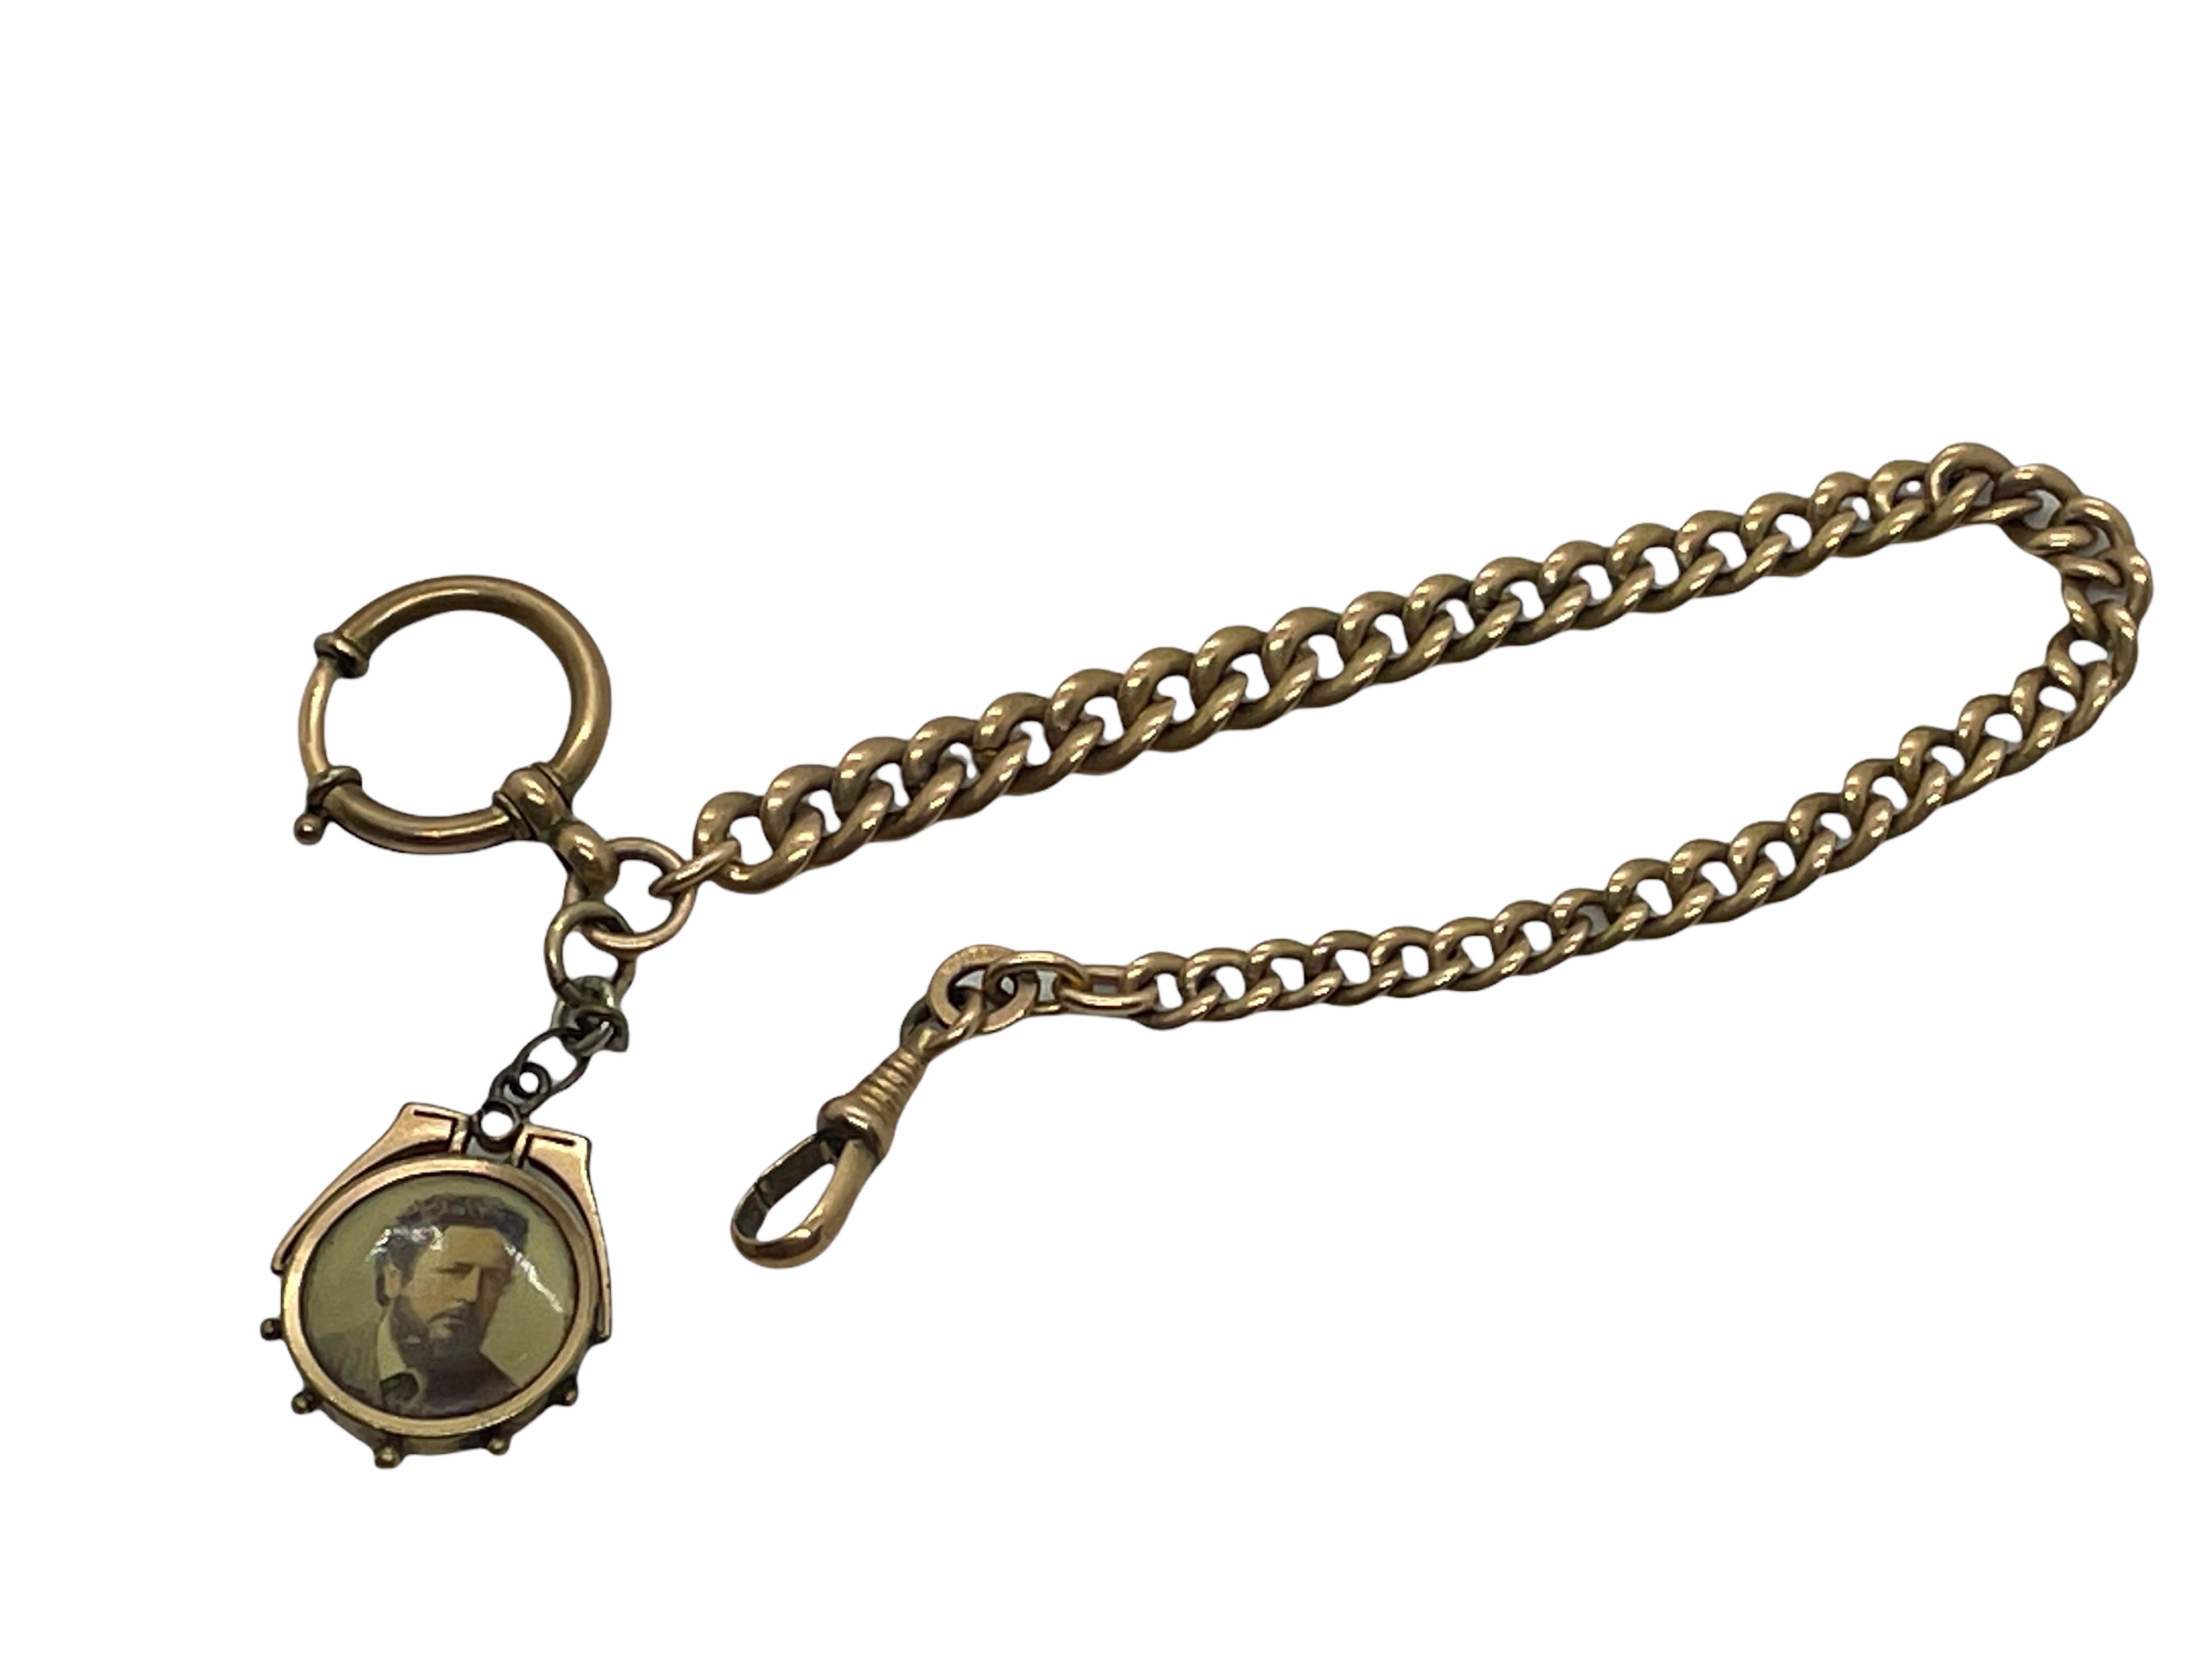 Antique German Art Nouveau Jewelry Pocket Watch Chain with Fob, 1900s For Sale 1